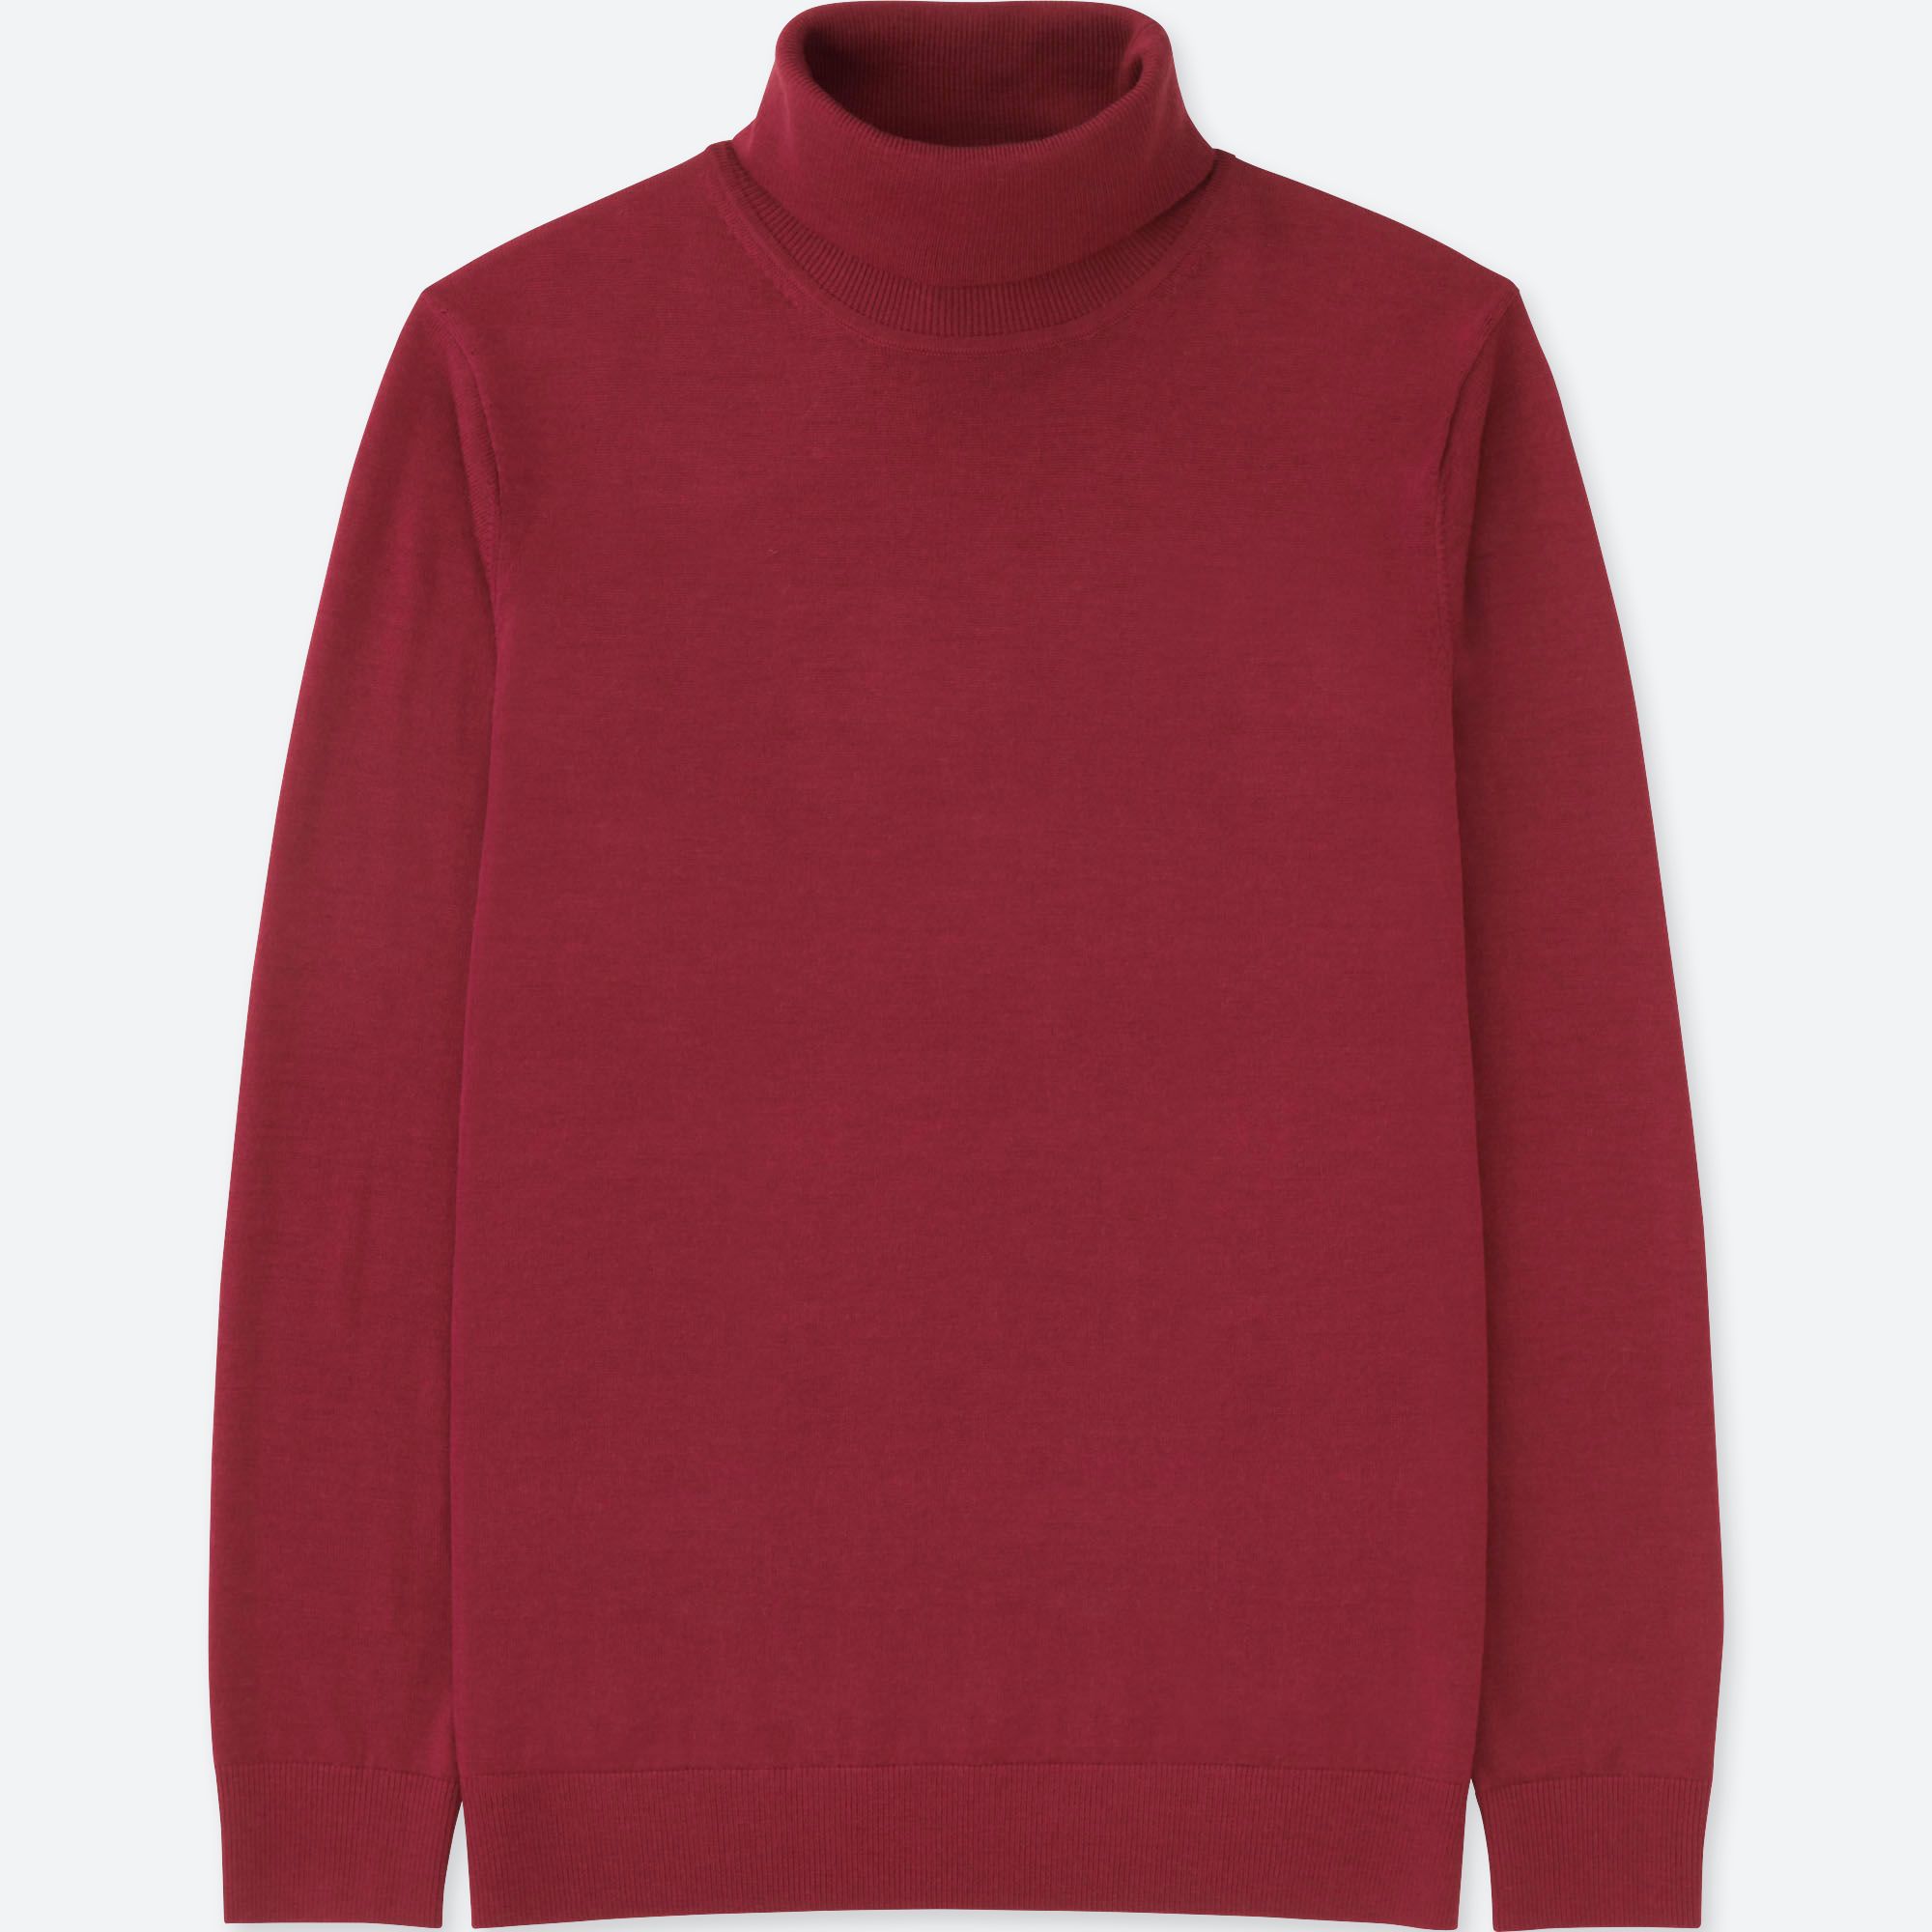 Compare Prices on Men Red Cardigan- Online Shopping/Buy